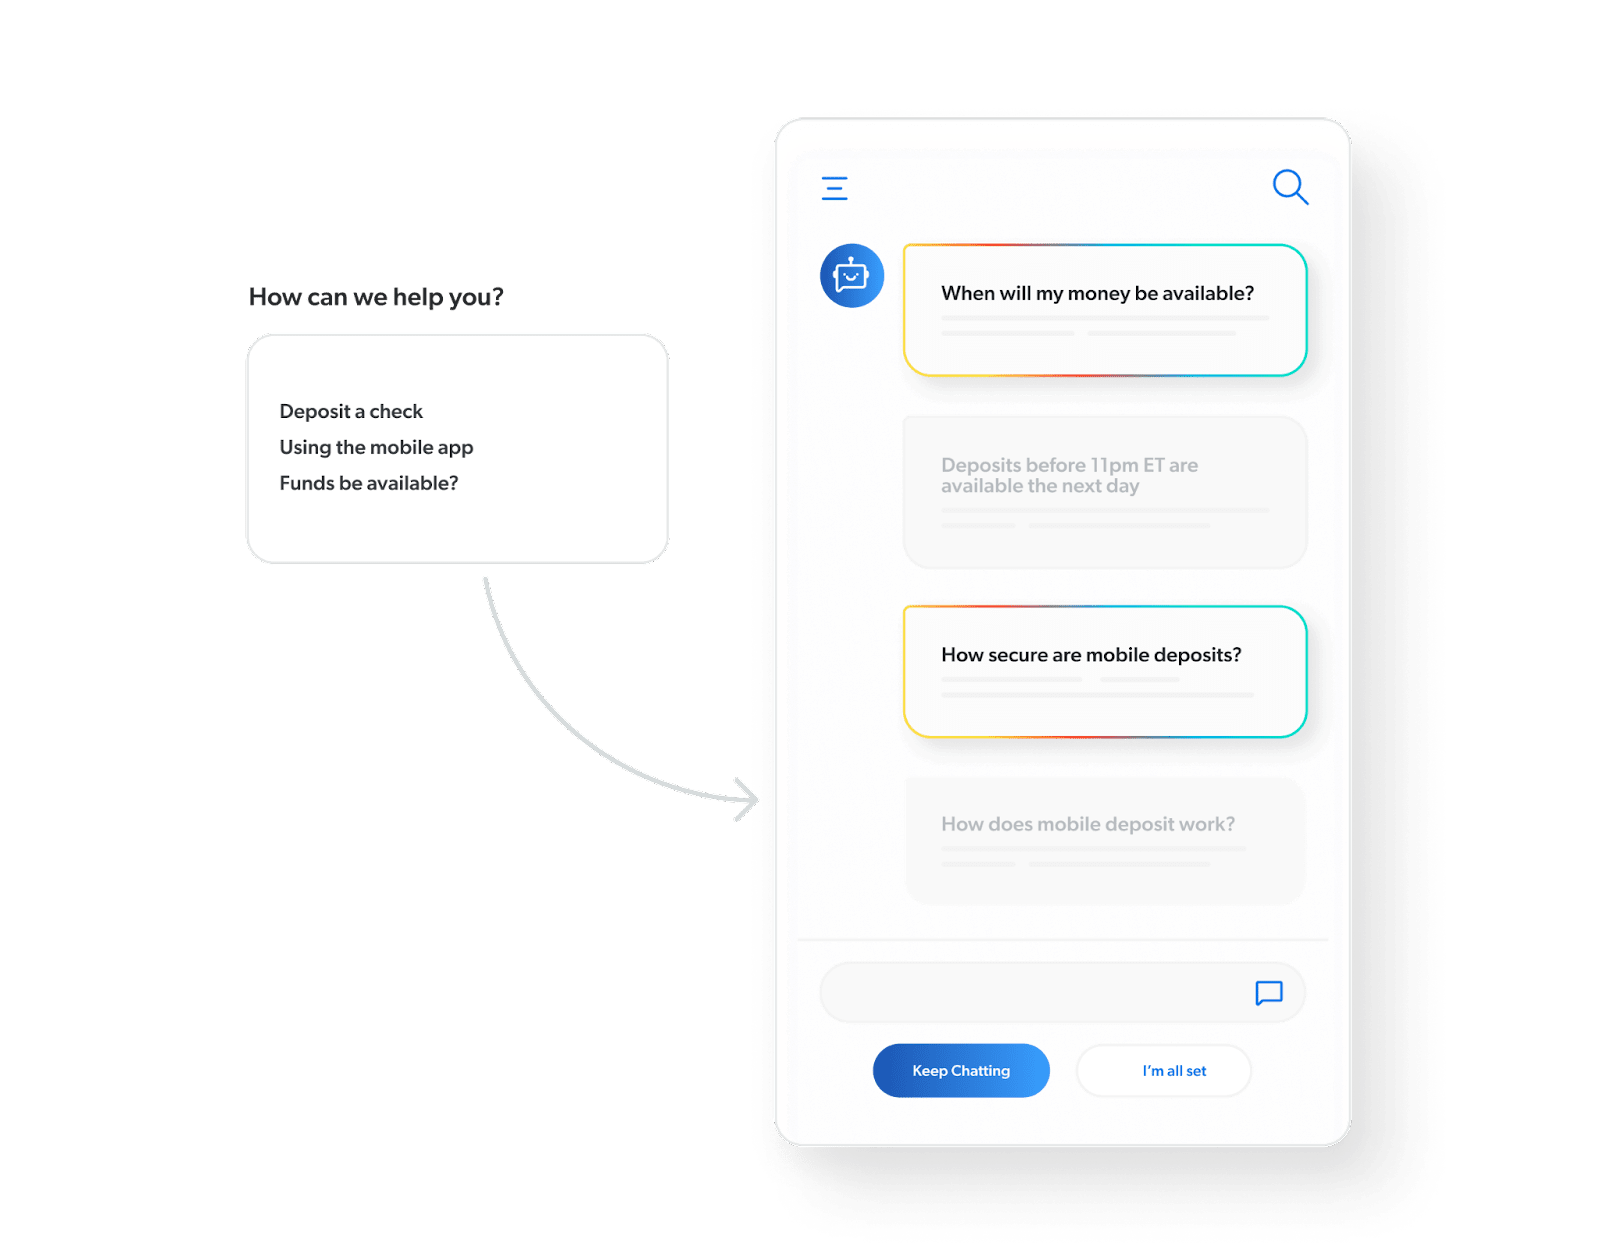 An image depicts a chatbot serving up responses and content as answers to questions